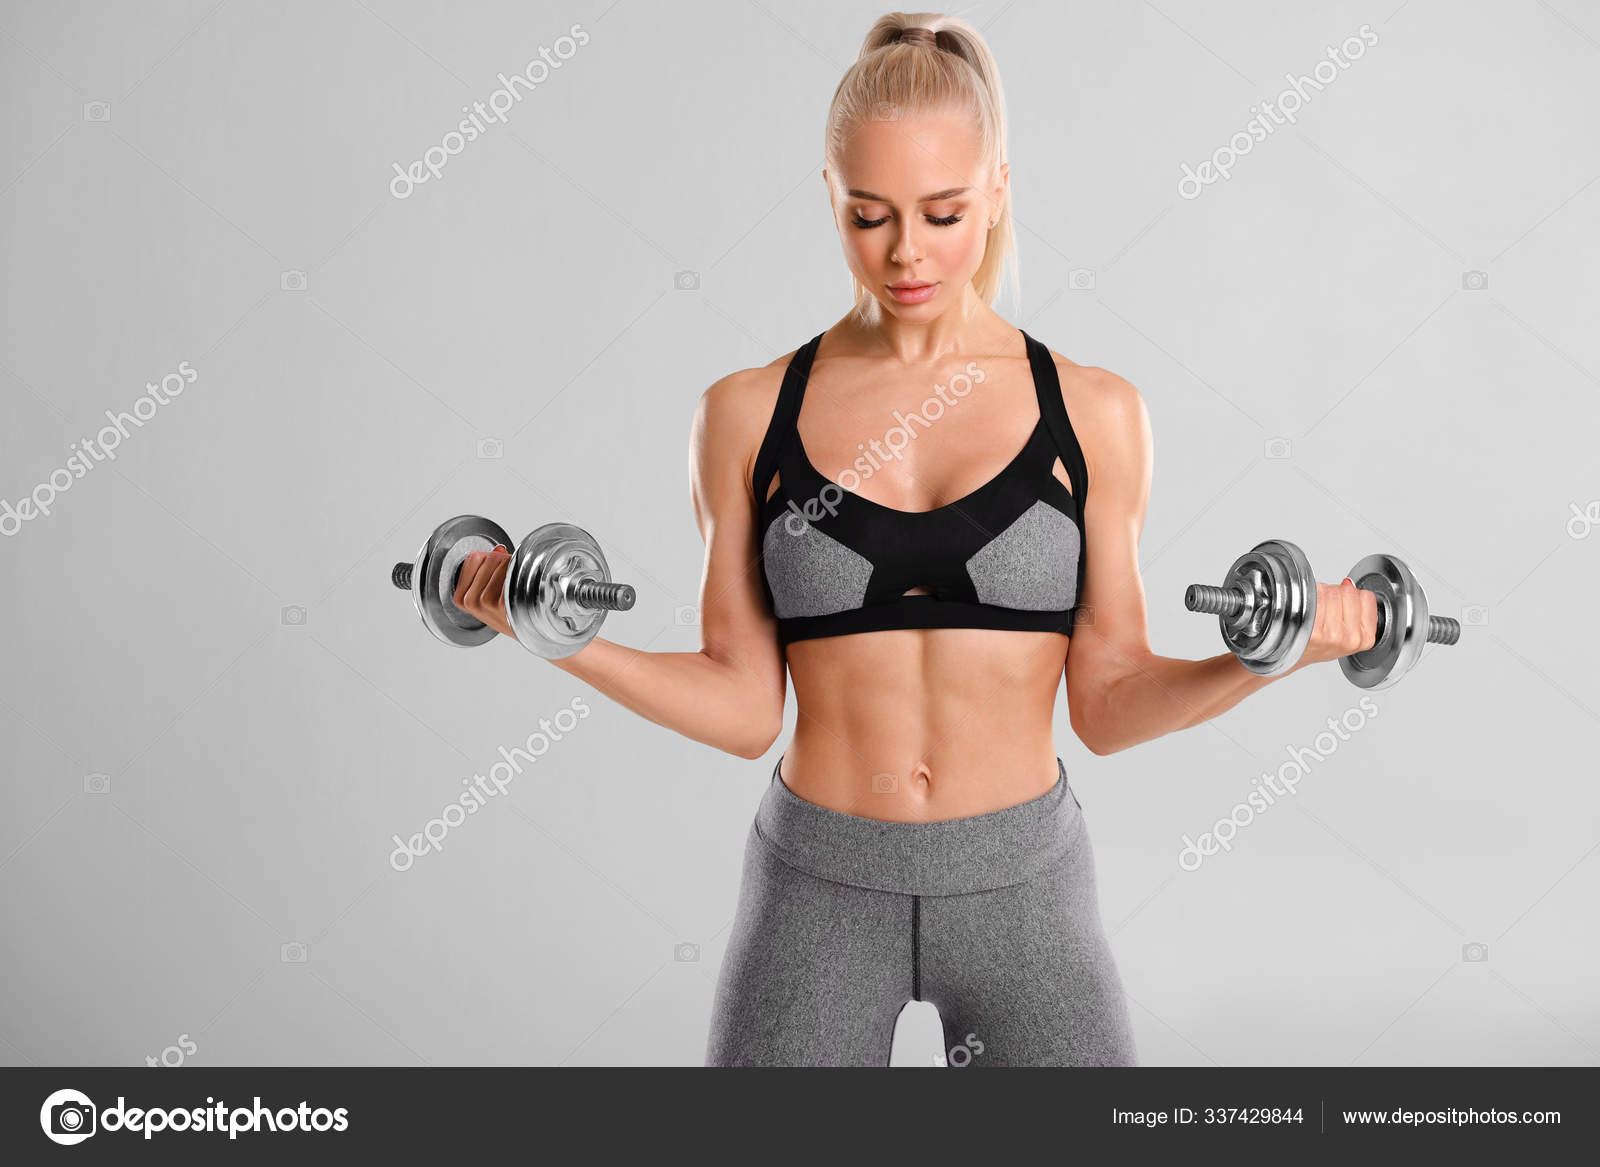 Fitness Woman Working Out in Gym Doing Exercise for Biceps